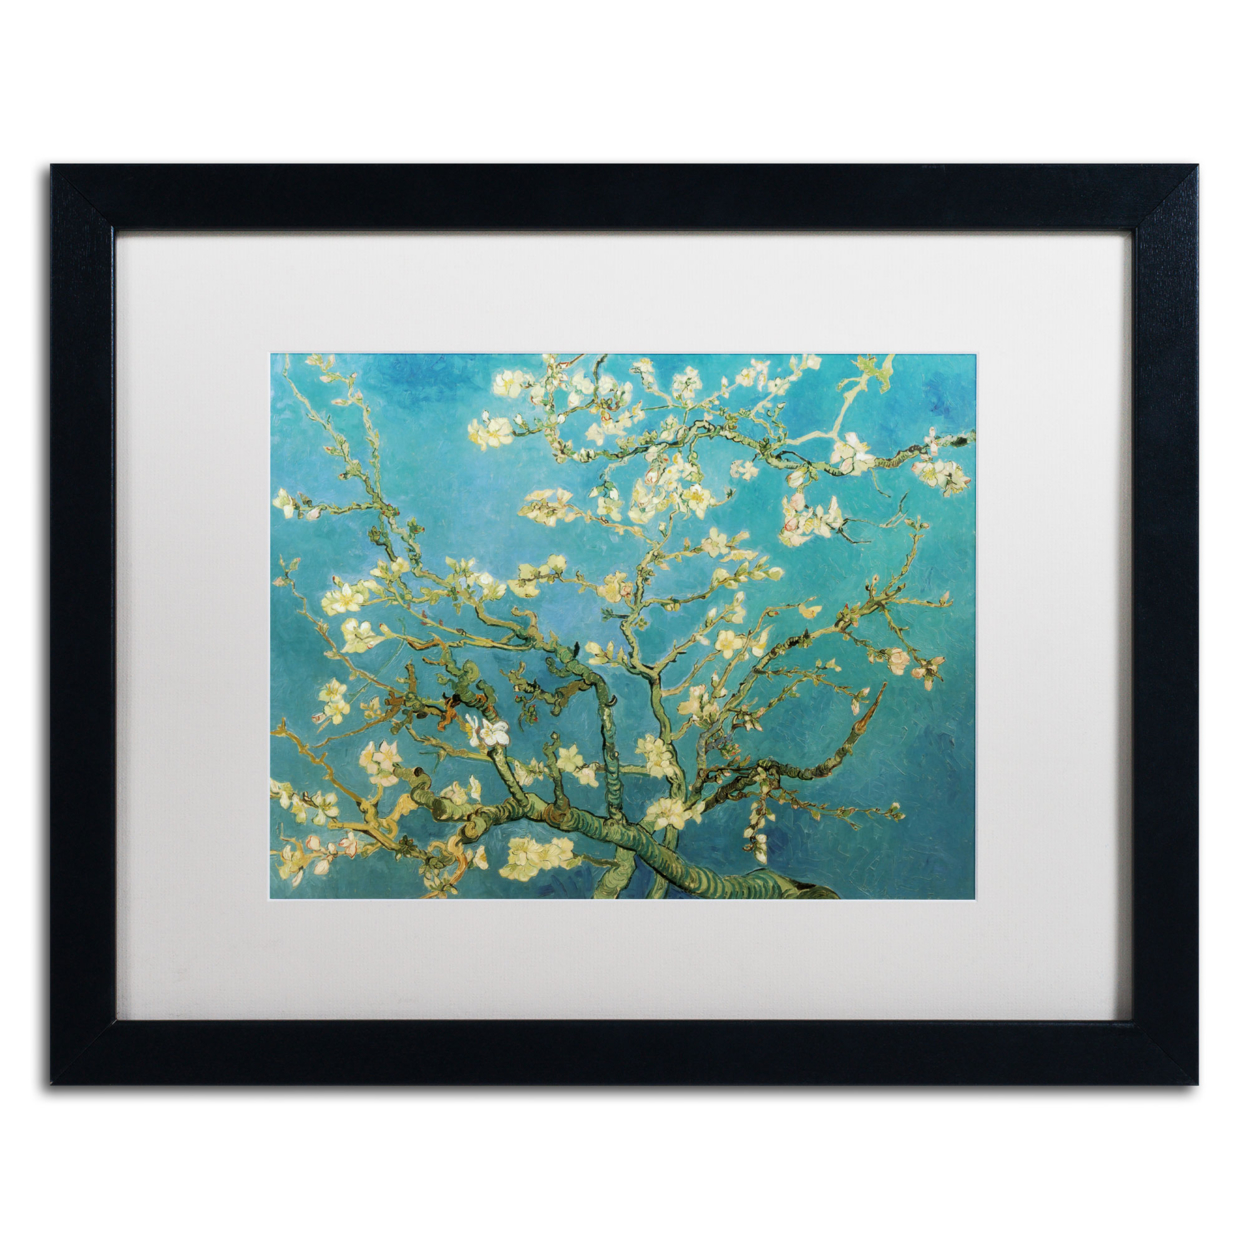 Vincent Van Gogh 'Almond Branches' Black Wooden Framed Art 18 X 22 Inches